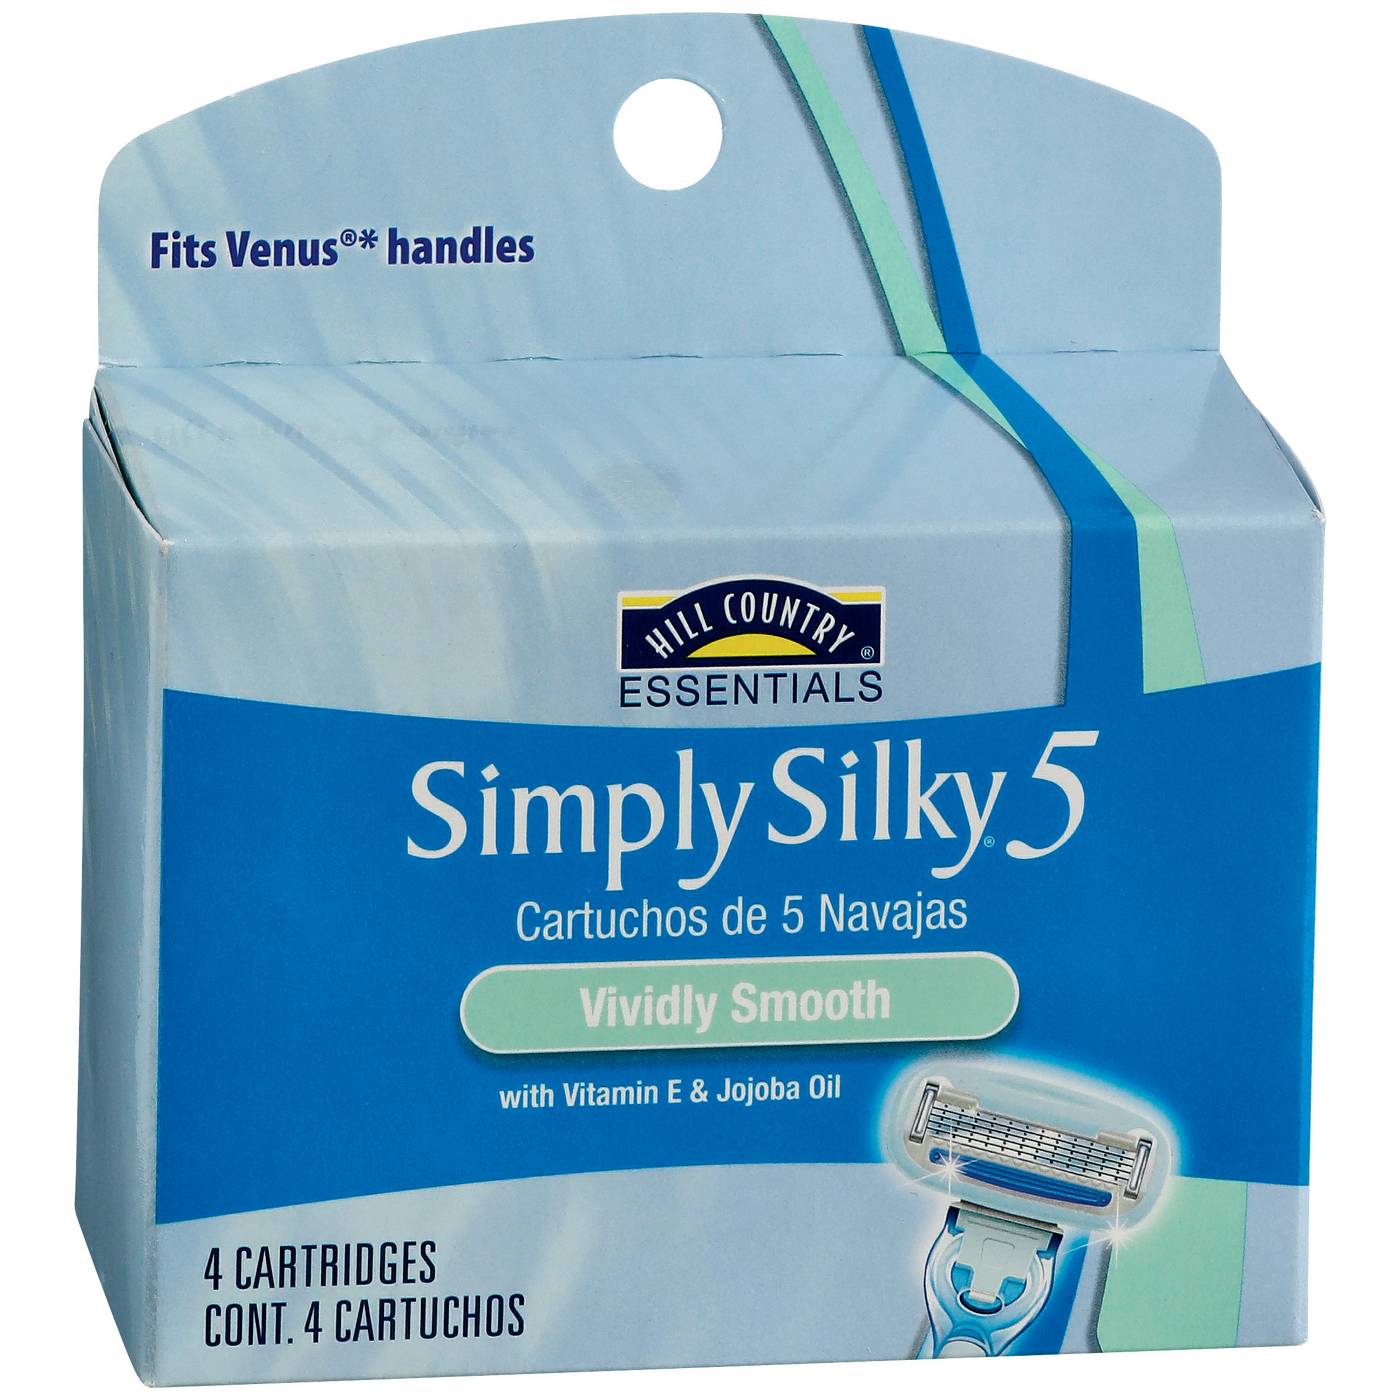 Hill Country Essentials Simply Silky 5 Refill; image 1 of 6